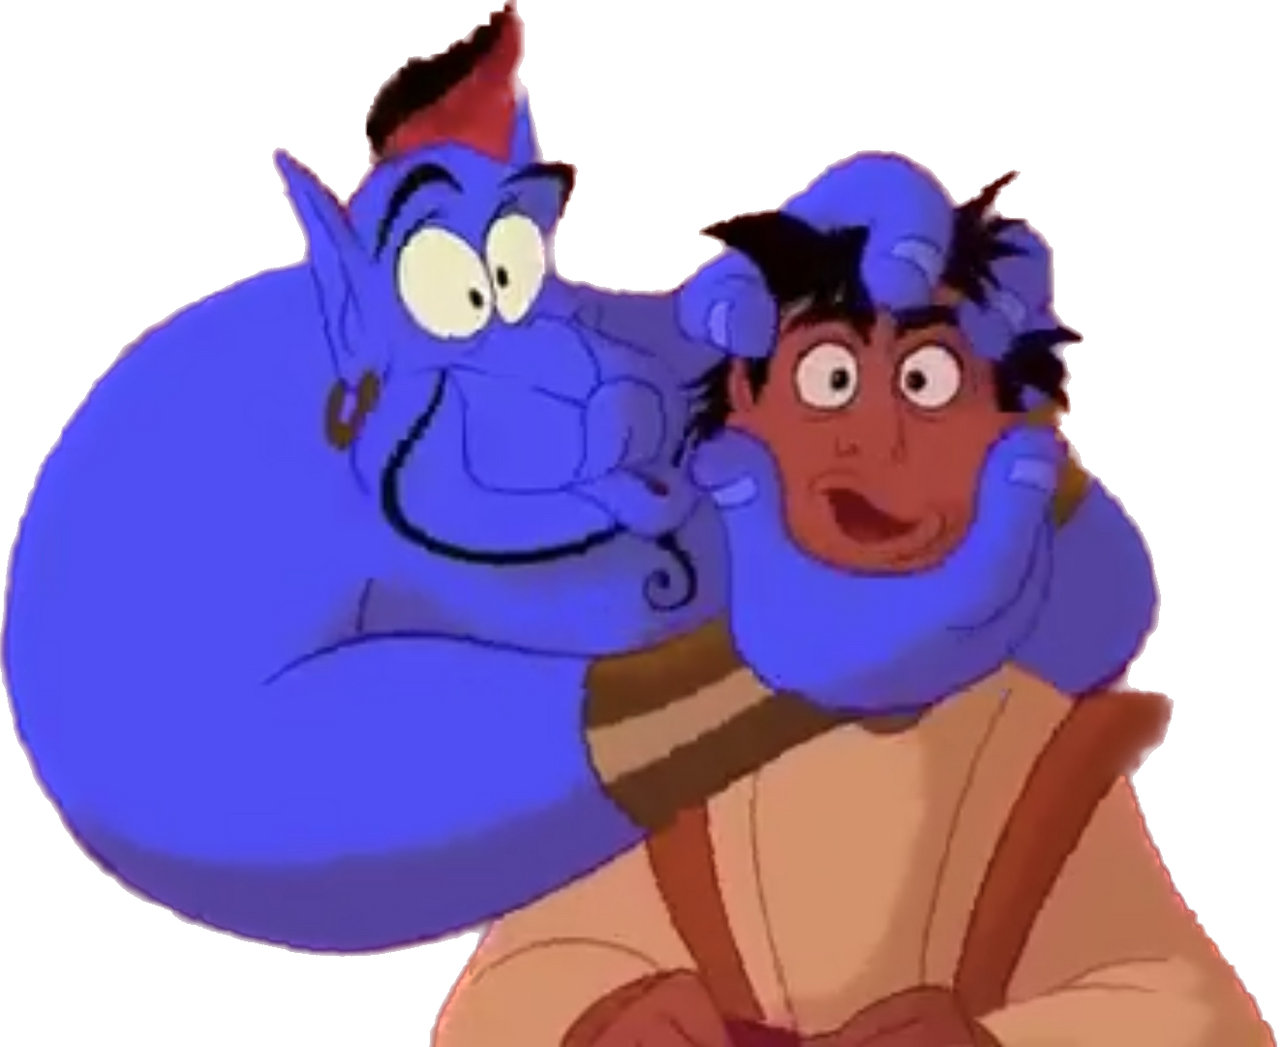 Aladdin and Genie png by riomadagascarkfp1 on DeviantArt